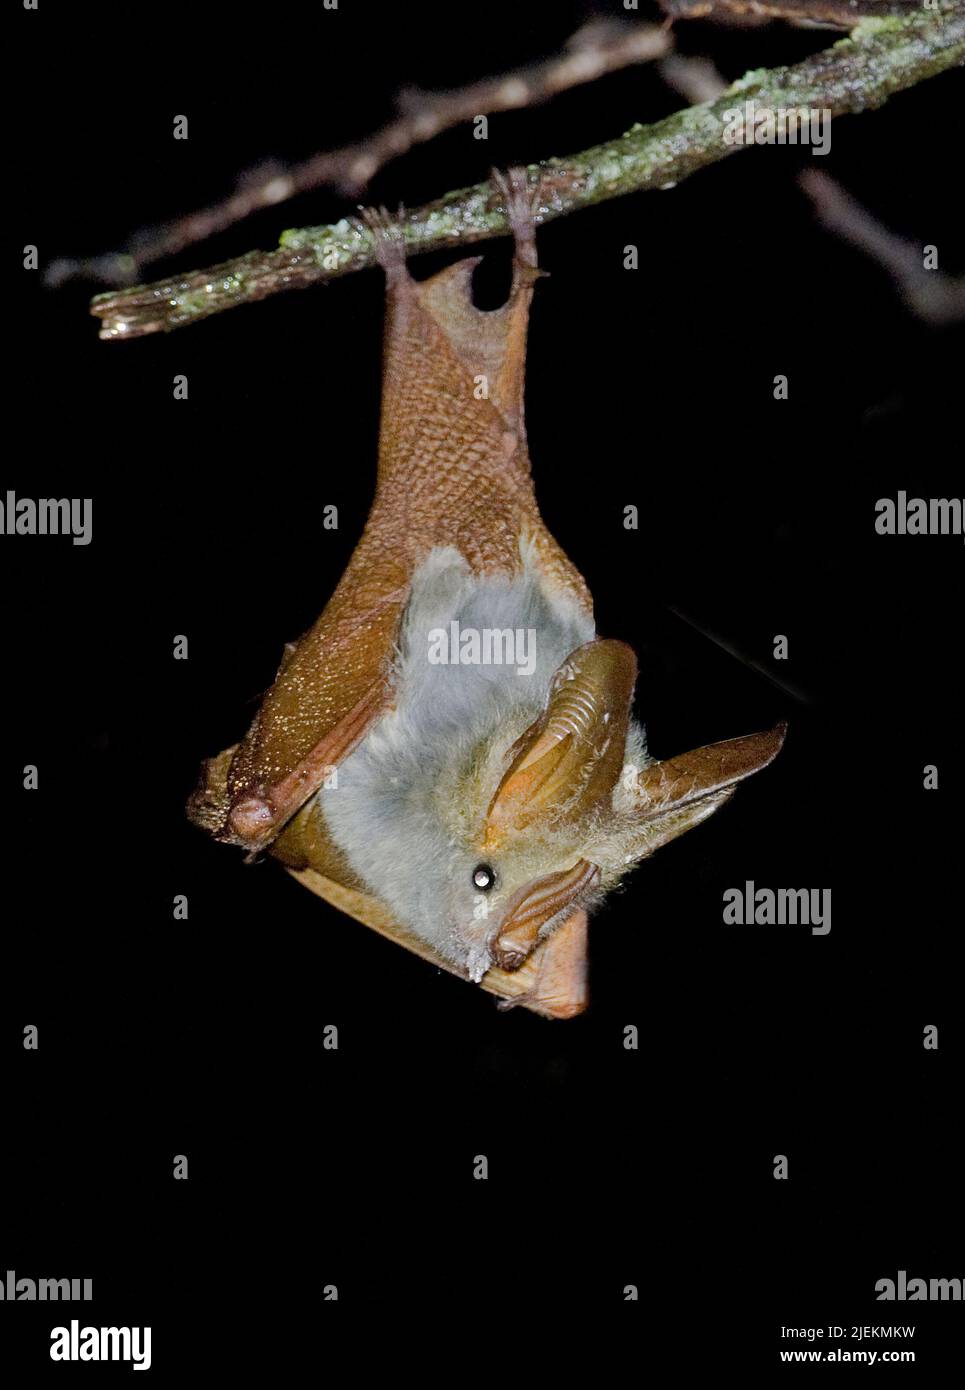 Yellow-winged Bat, Lavia frons, from Sweetwaters, Kenya. Stock Photo